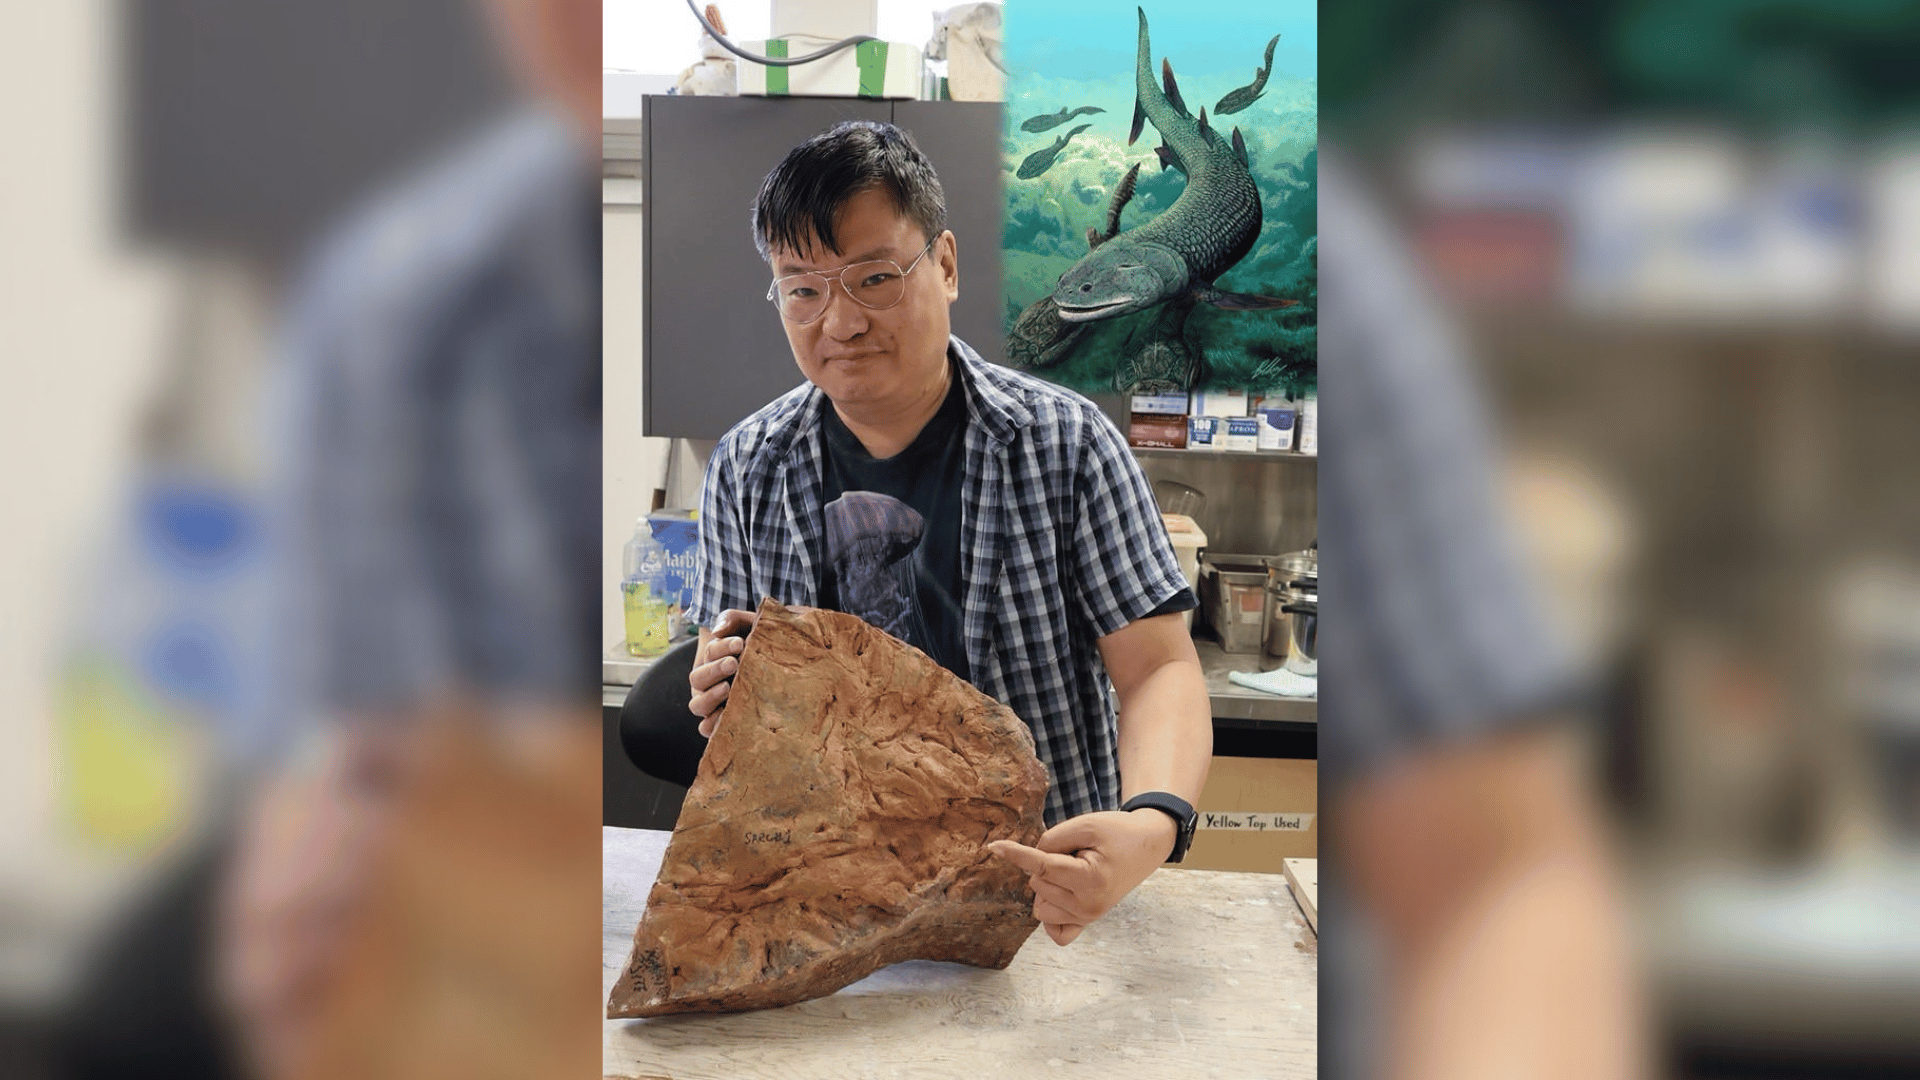 Flinders University palaeontologist Dr Brian Choo, with the well-preserved fossil fish (and artwork inset). Credit: Flinders University